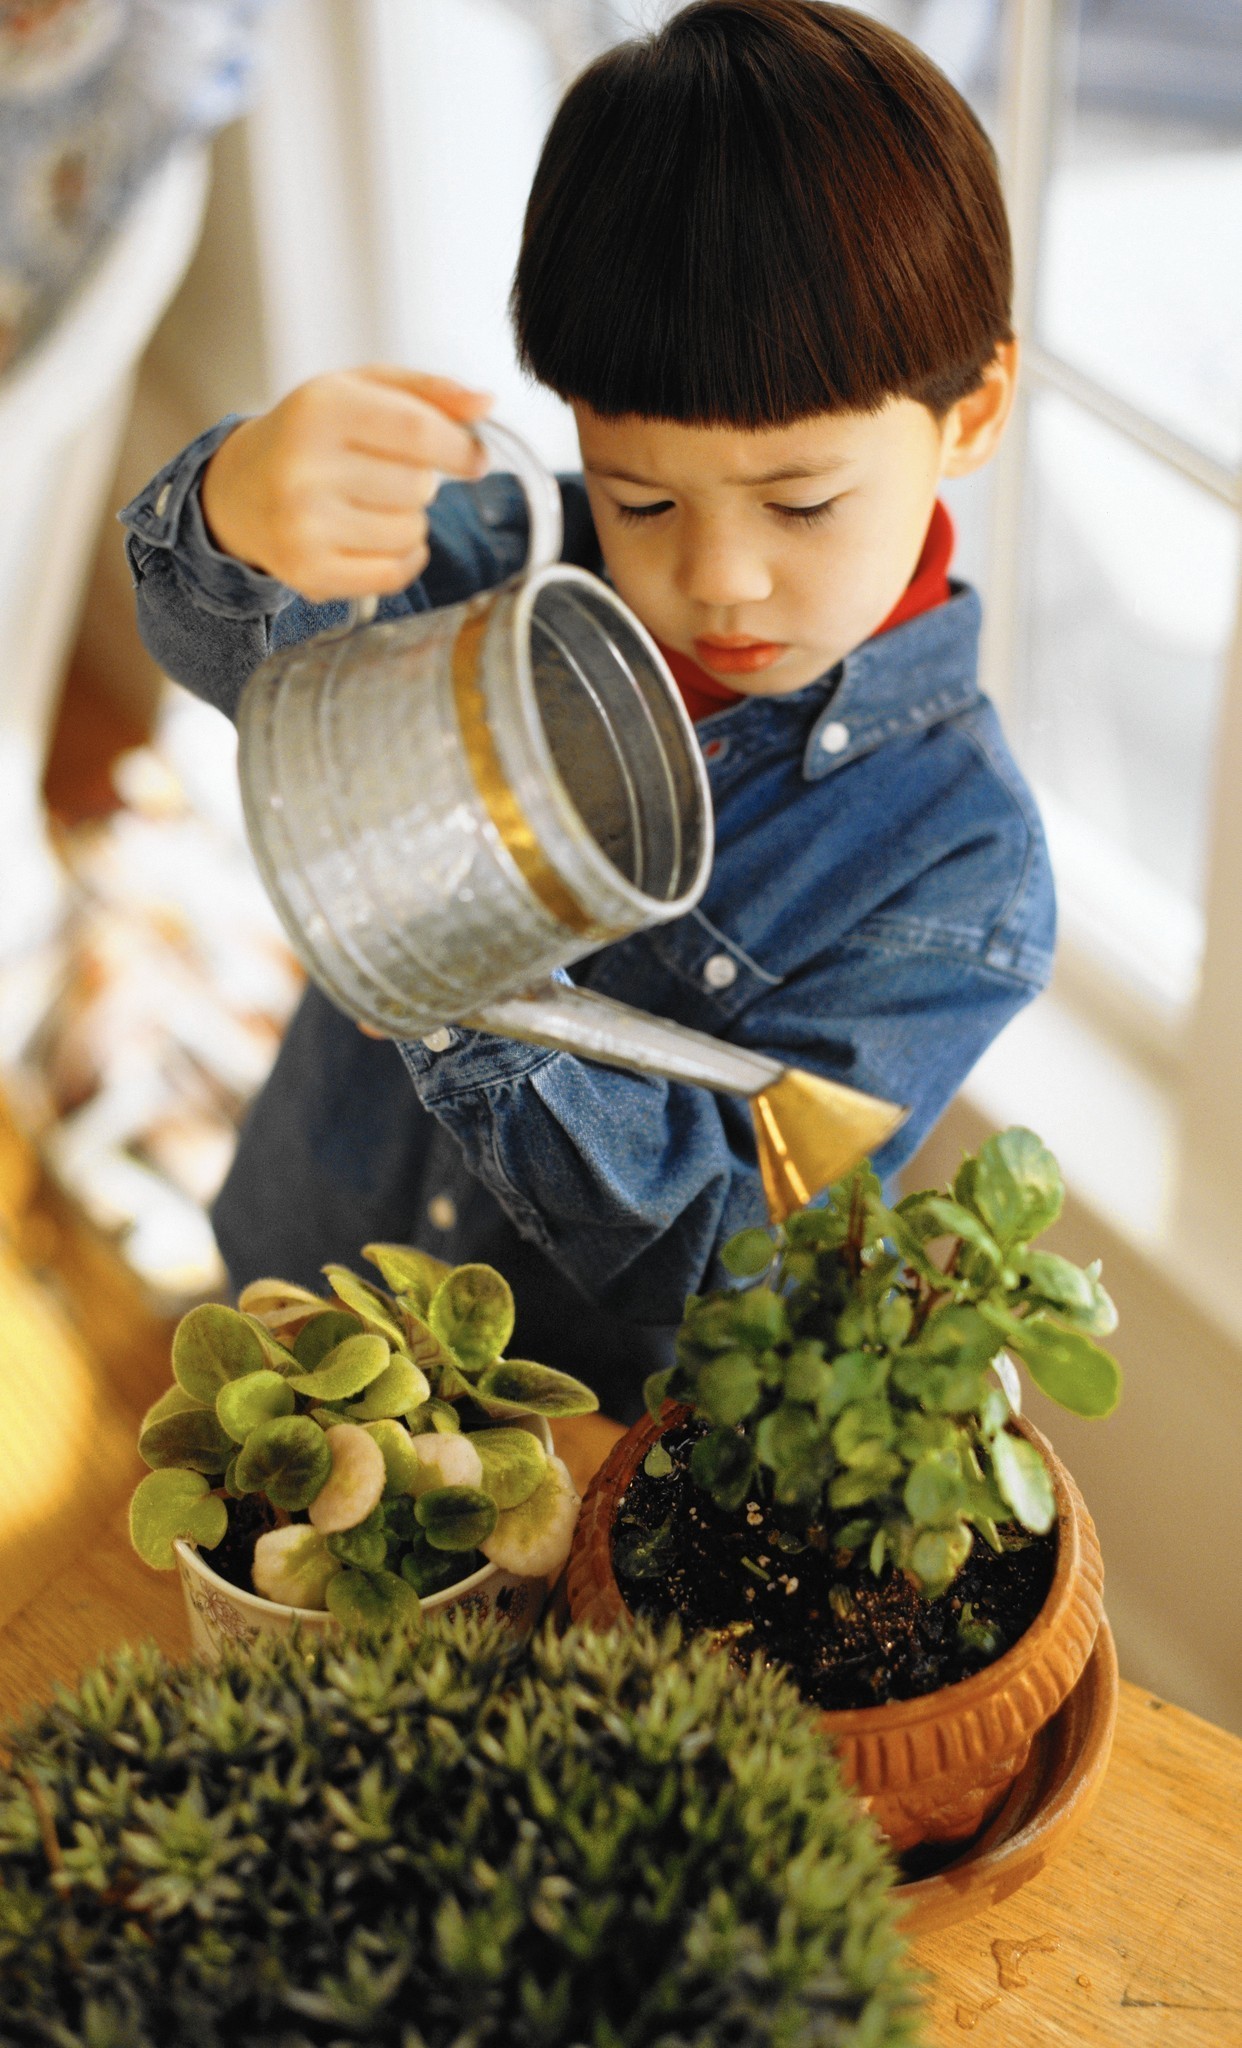 Children can grow along with the houseplants they tend